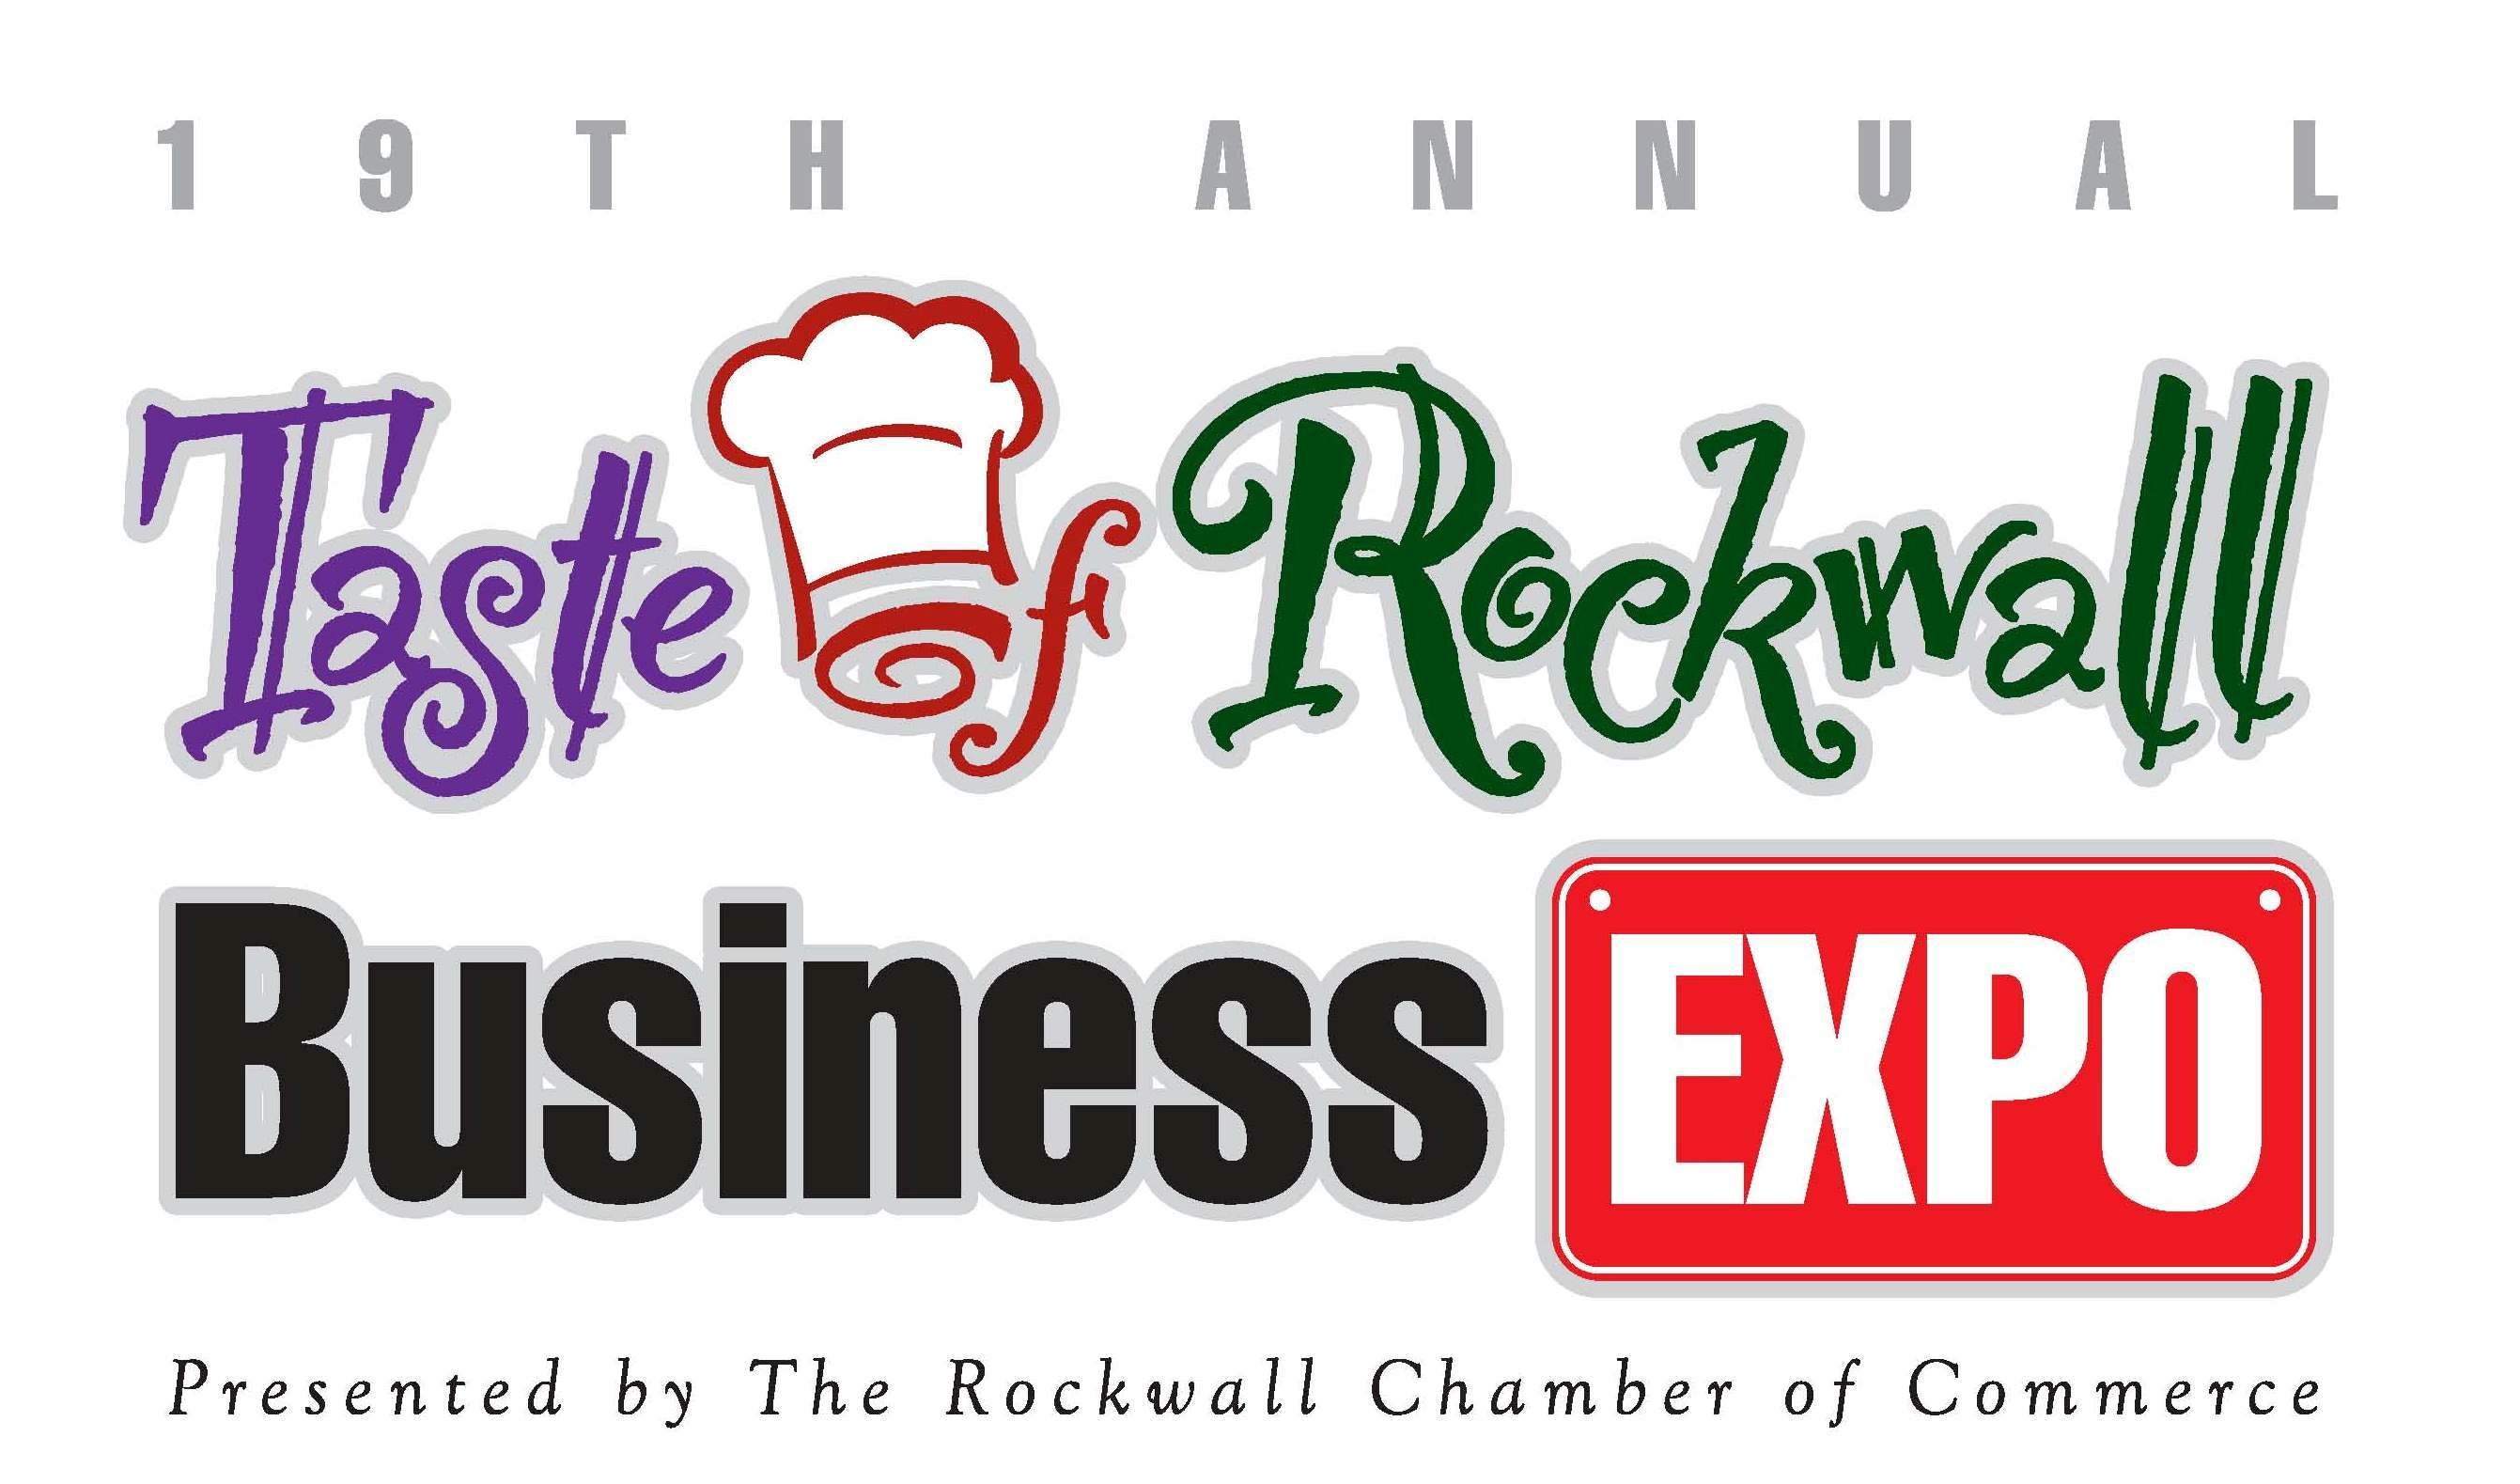 Taste of Rockwall, Business Expo coming April 19